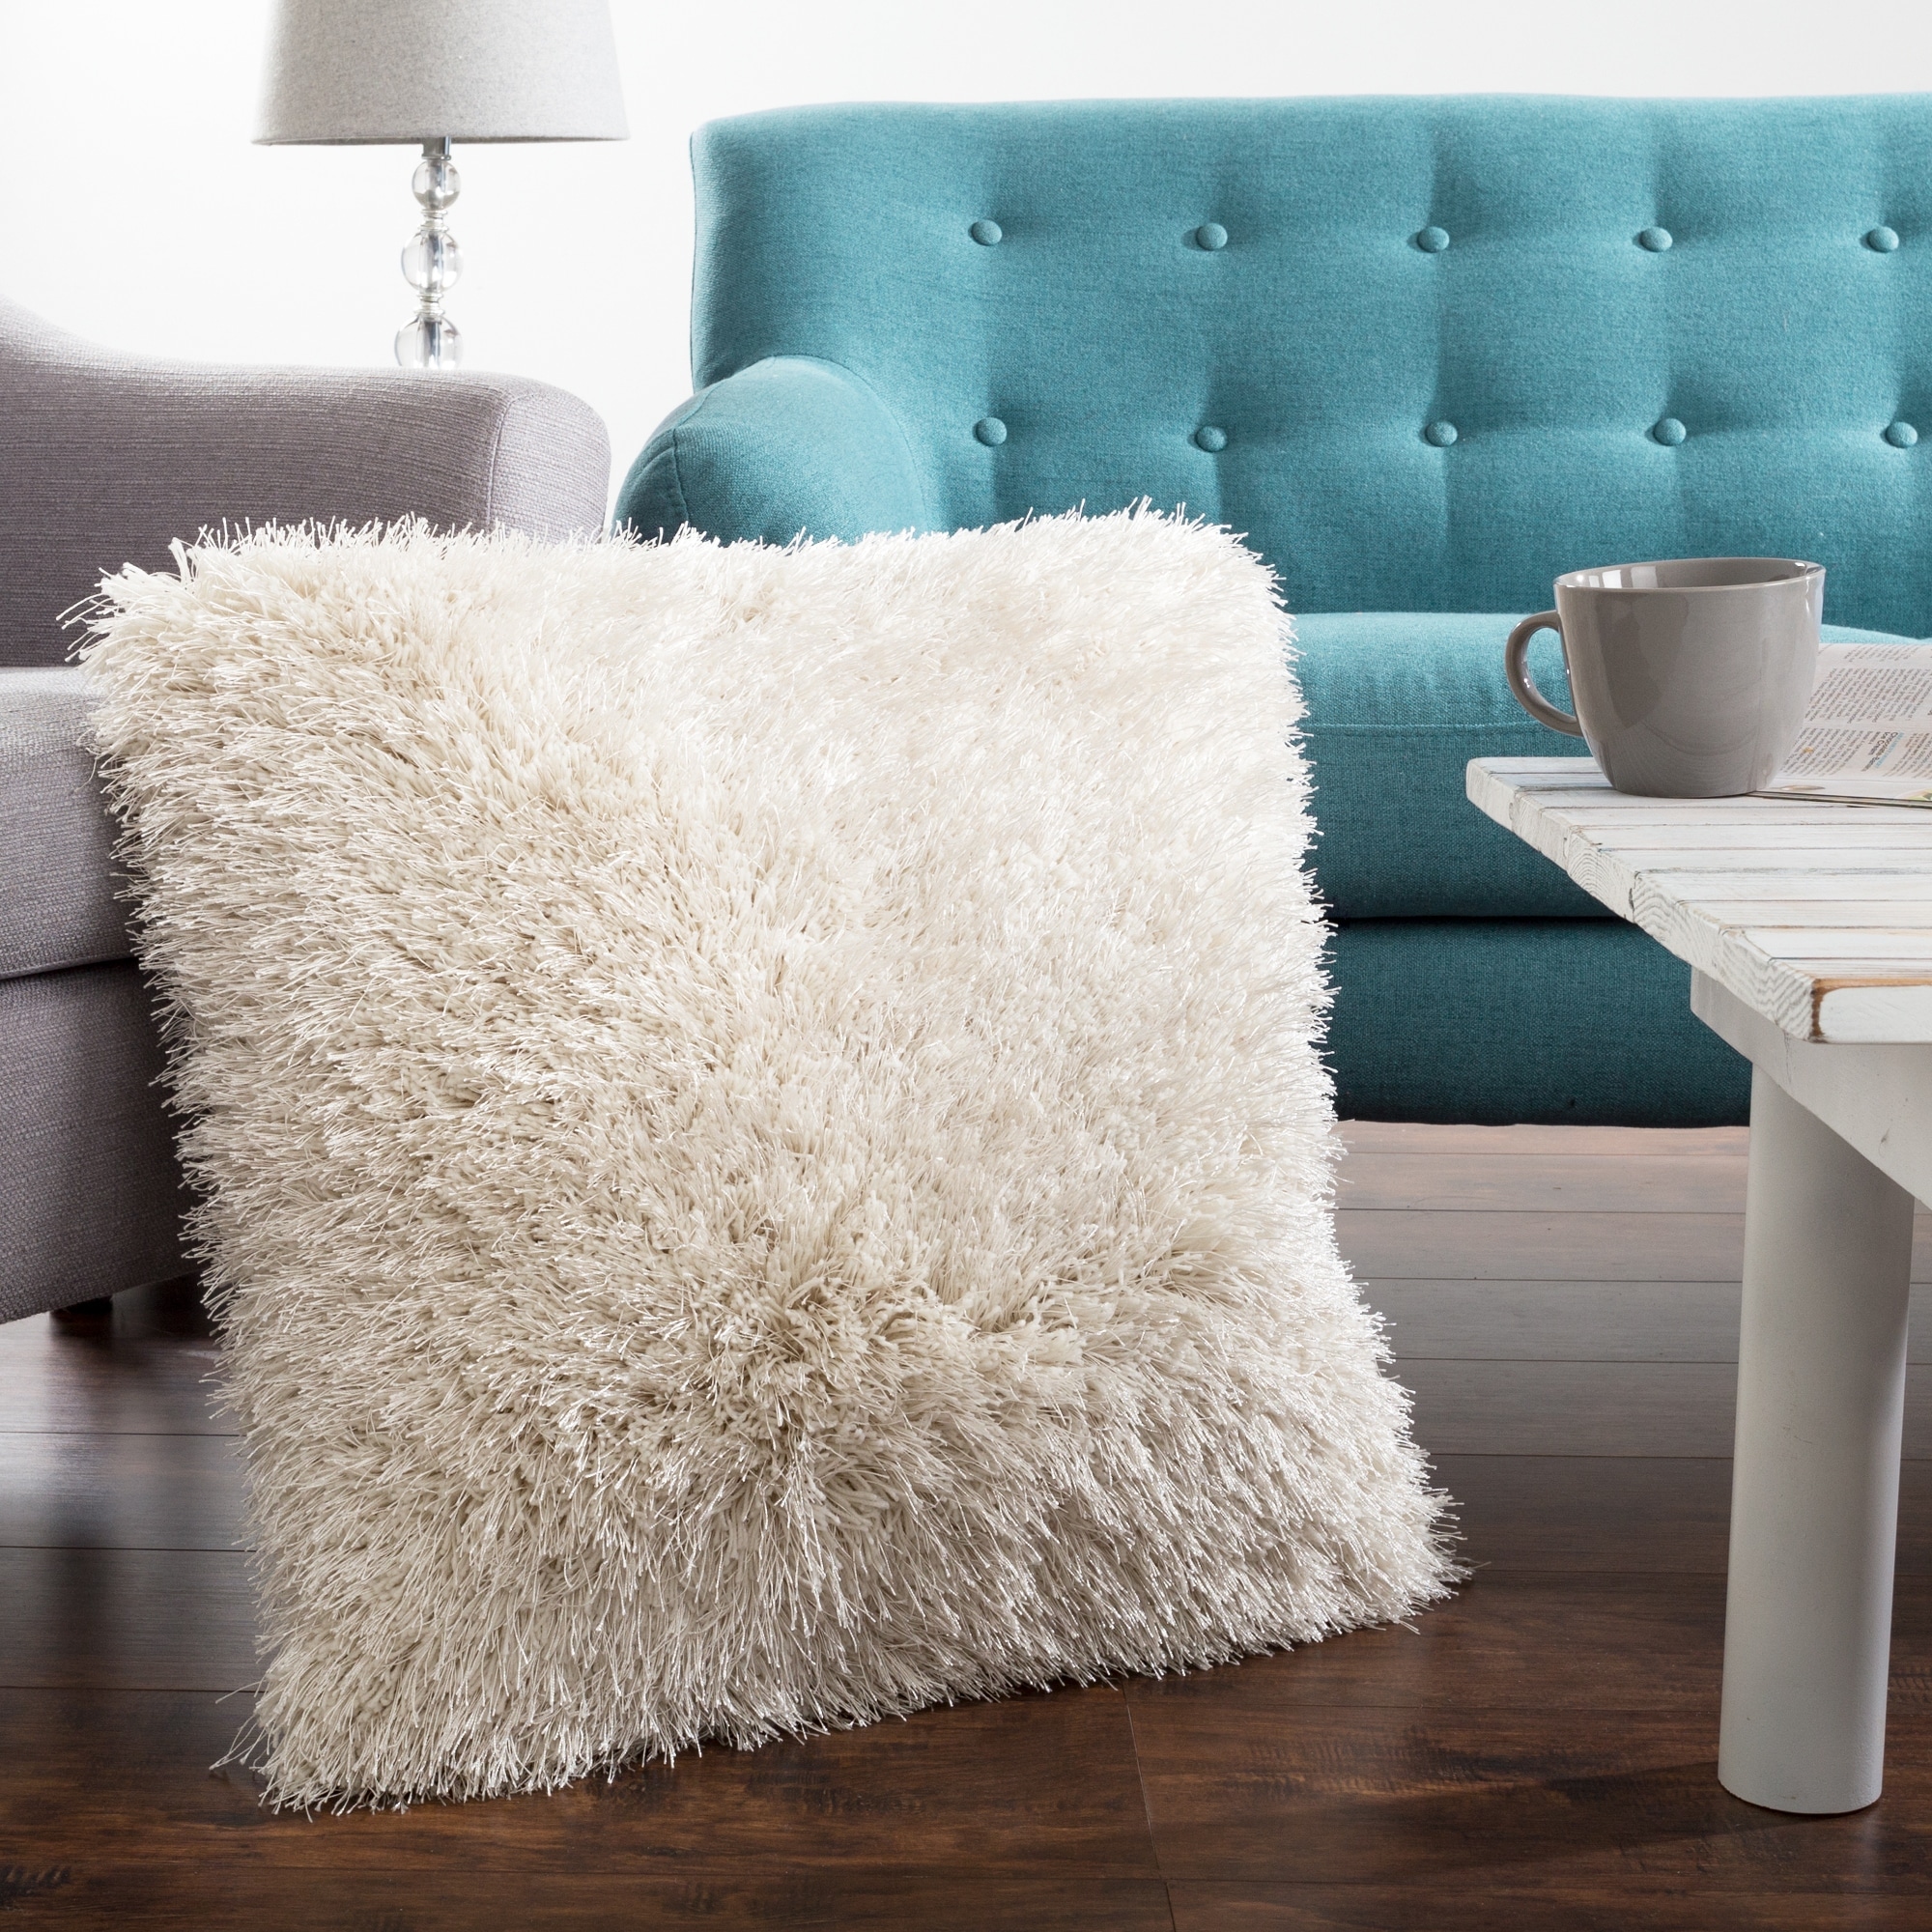 https://ak1.ostkcdn.com/images/products/is/images/direct/fc6cabaf0e060773745711d940c0ec066b7c4c28/Oversized-Floor-or-Throw-Pillow-Square-Shag-FauxFur-by-Windsor-Home.jpg